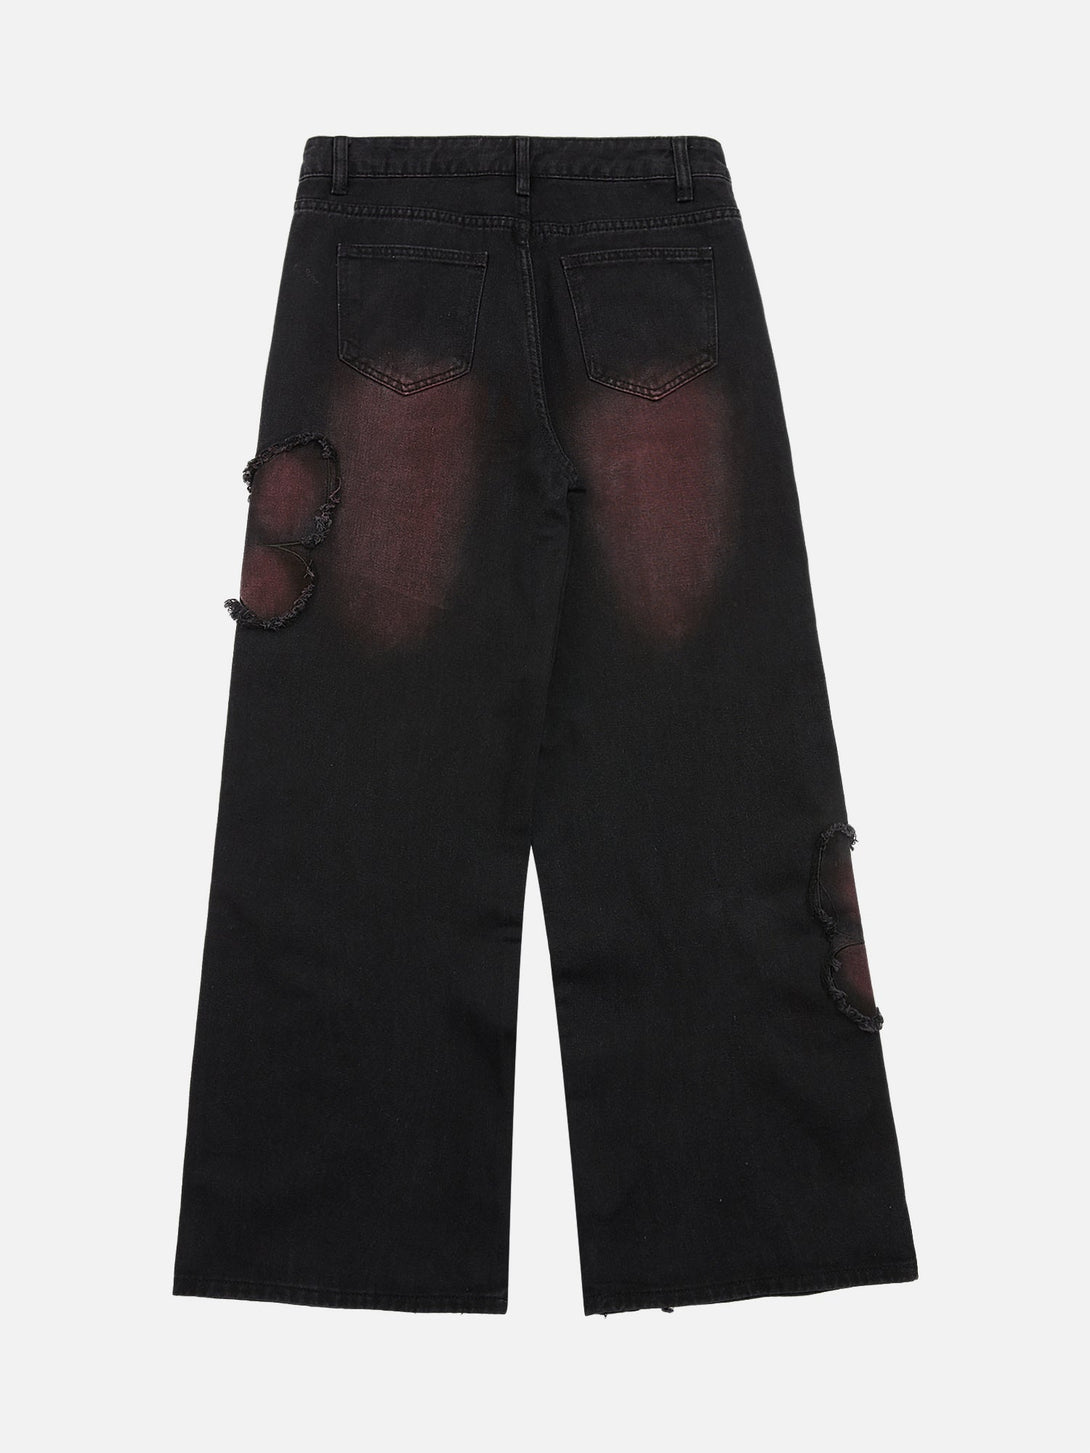 Majesda® - Tie-dye Butterfly Embroidered Raw Edge Jeans- Outfit Ideas - Streetwear Fashion - majesda.com